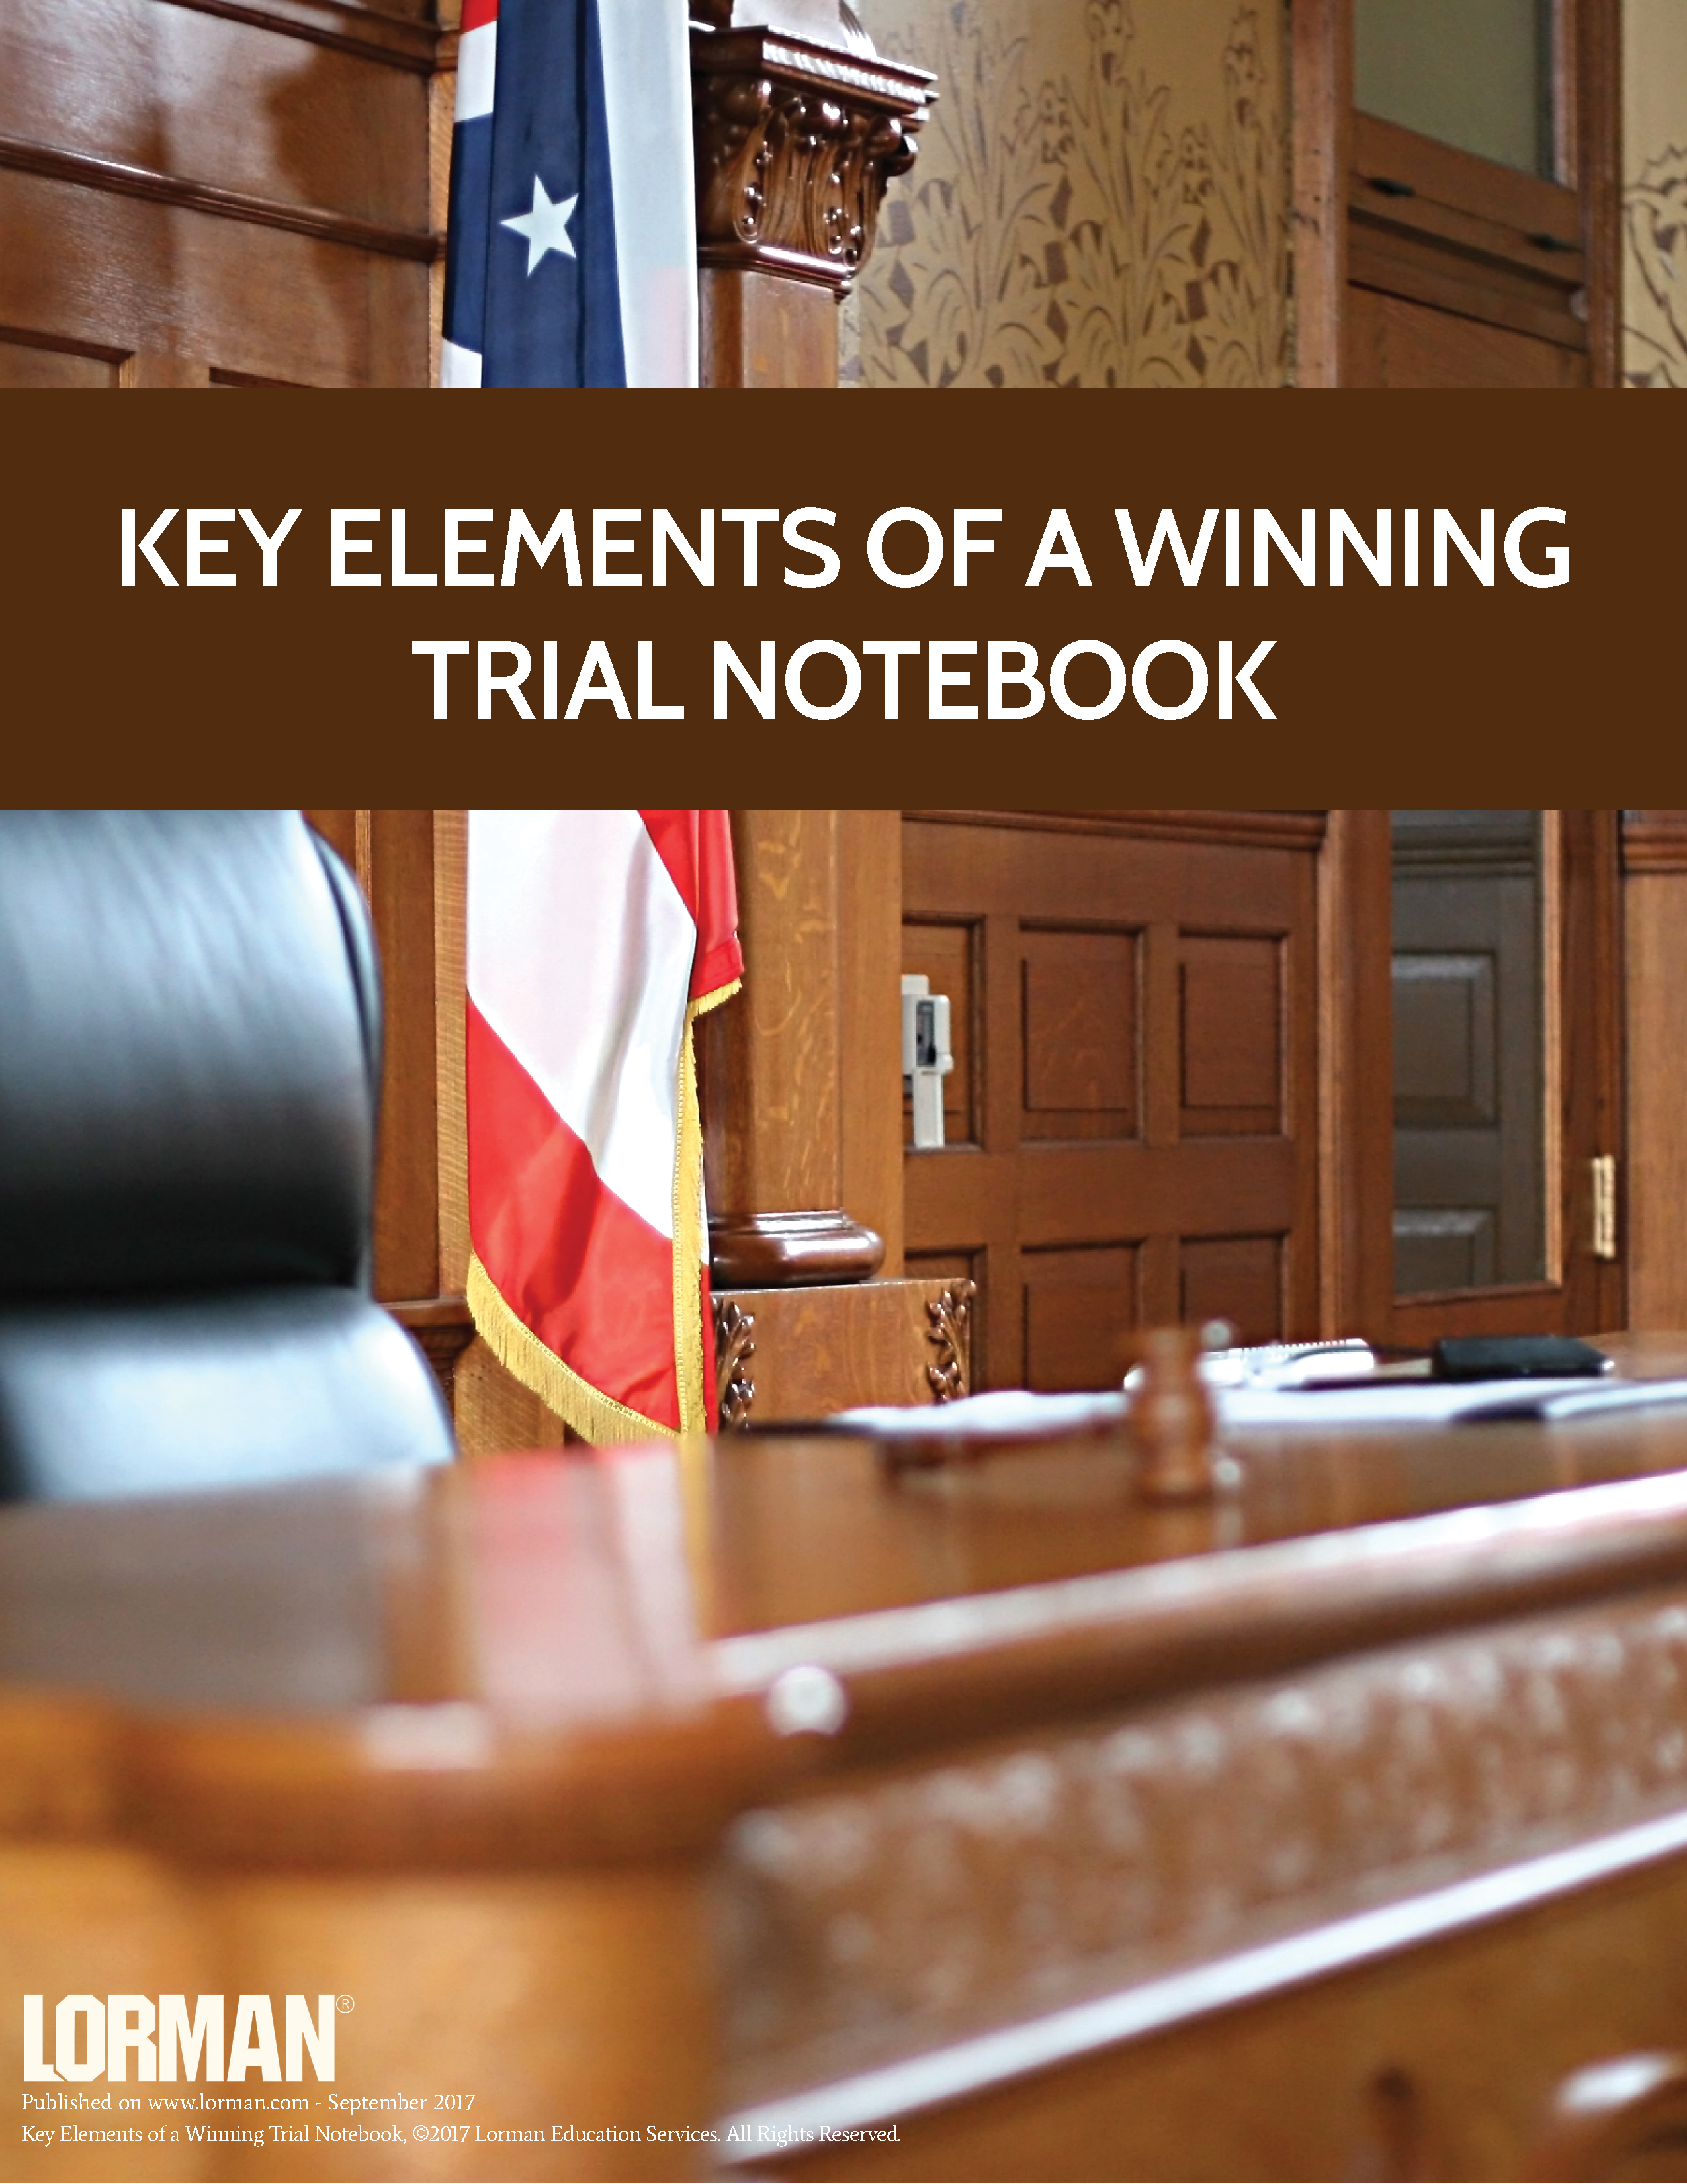 Key Elements of a Winning Trial Notebook